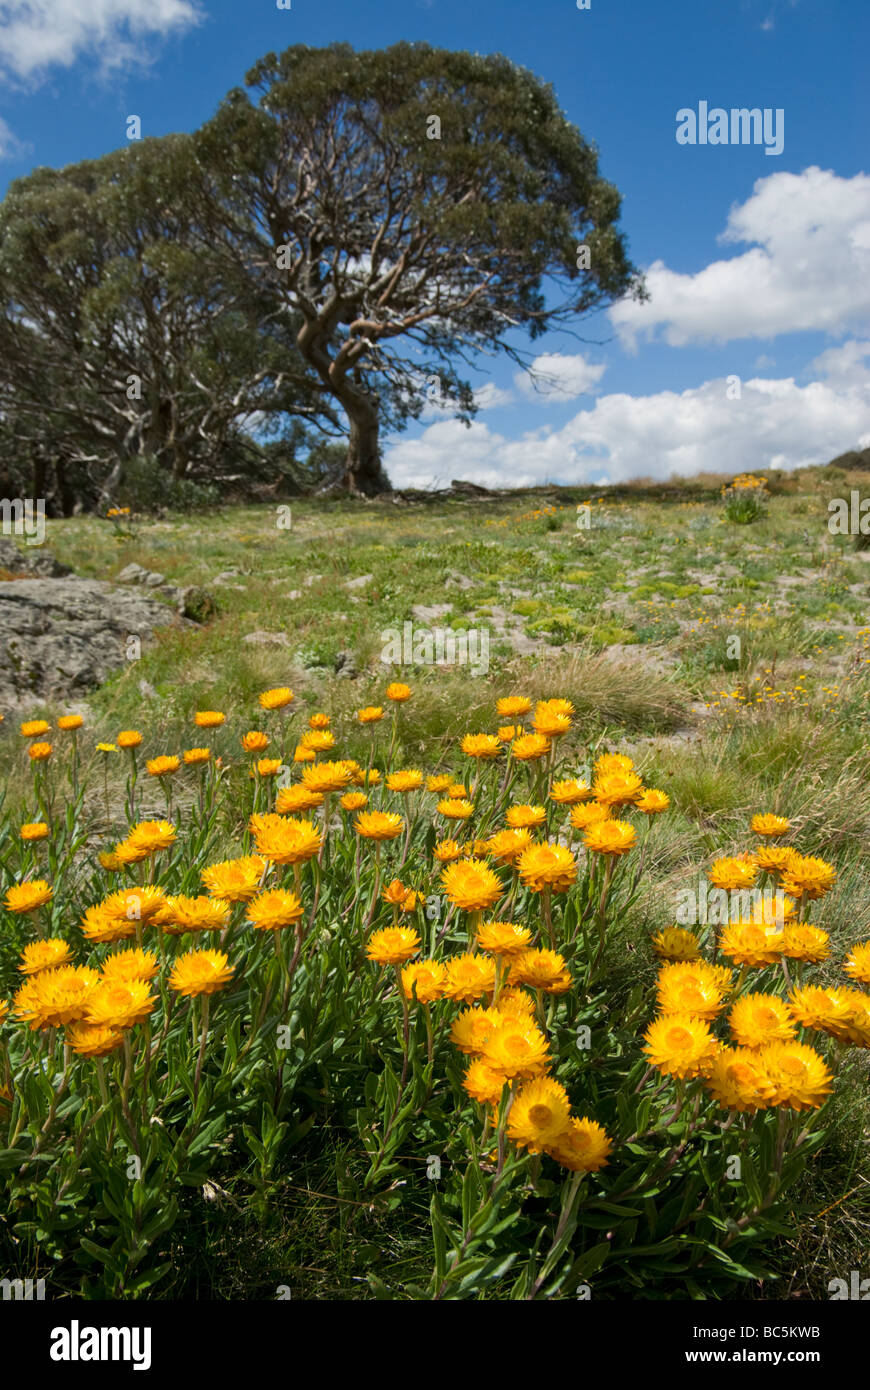 Summer daisies and snow gums Stock Photo